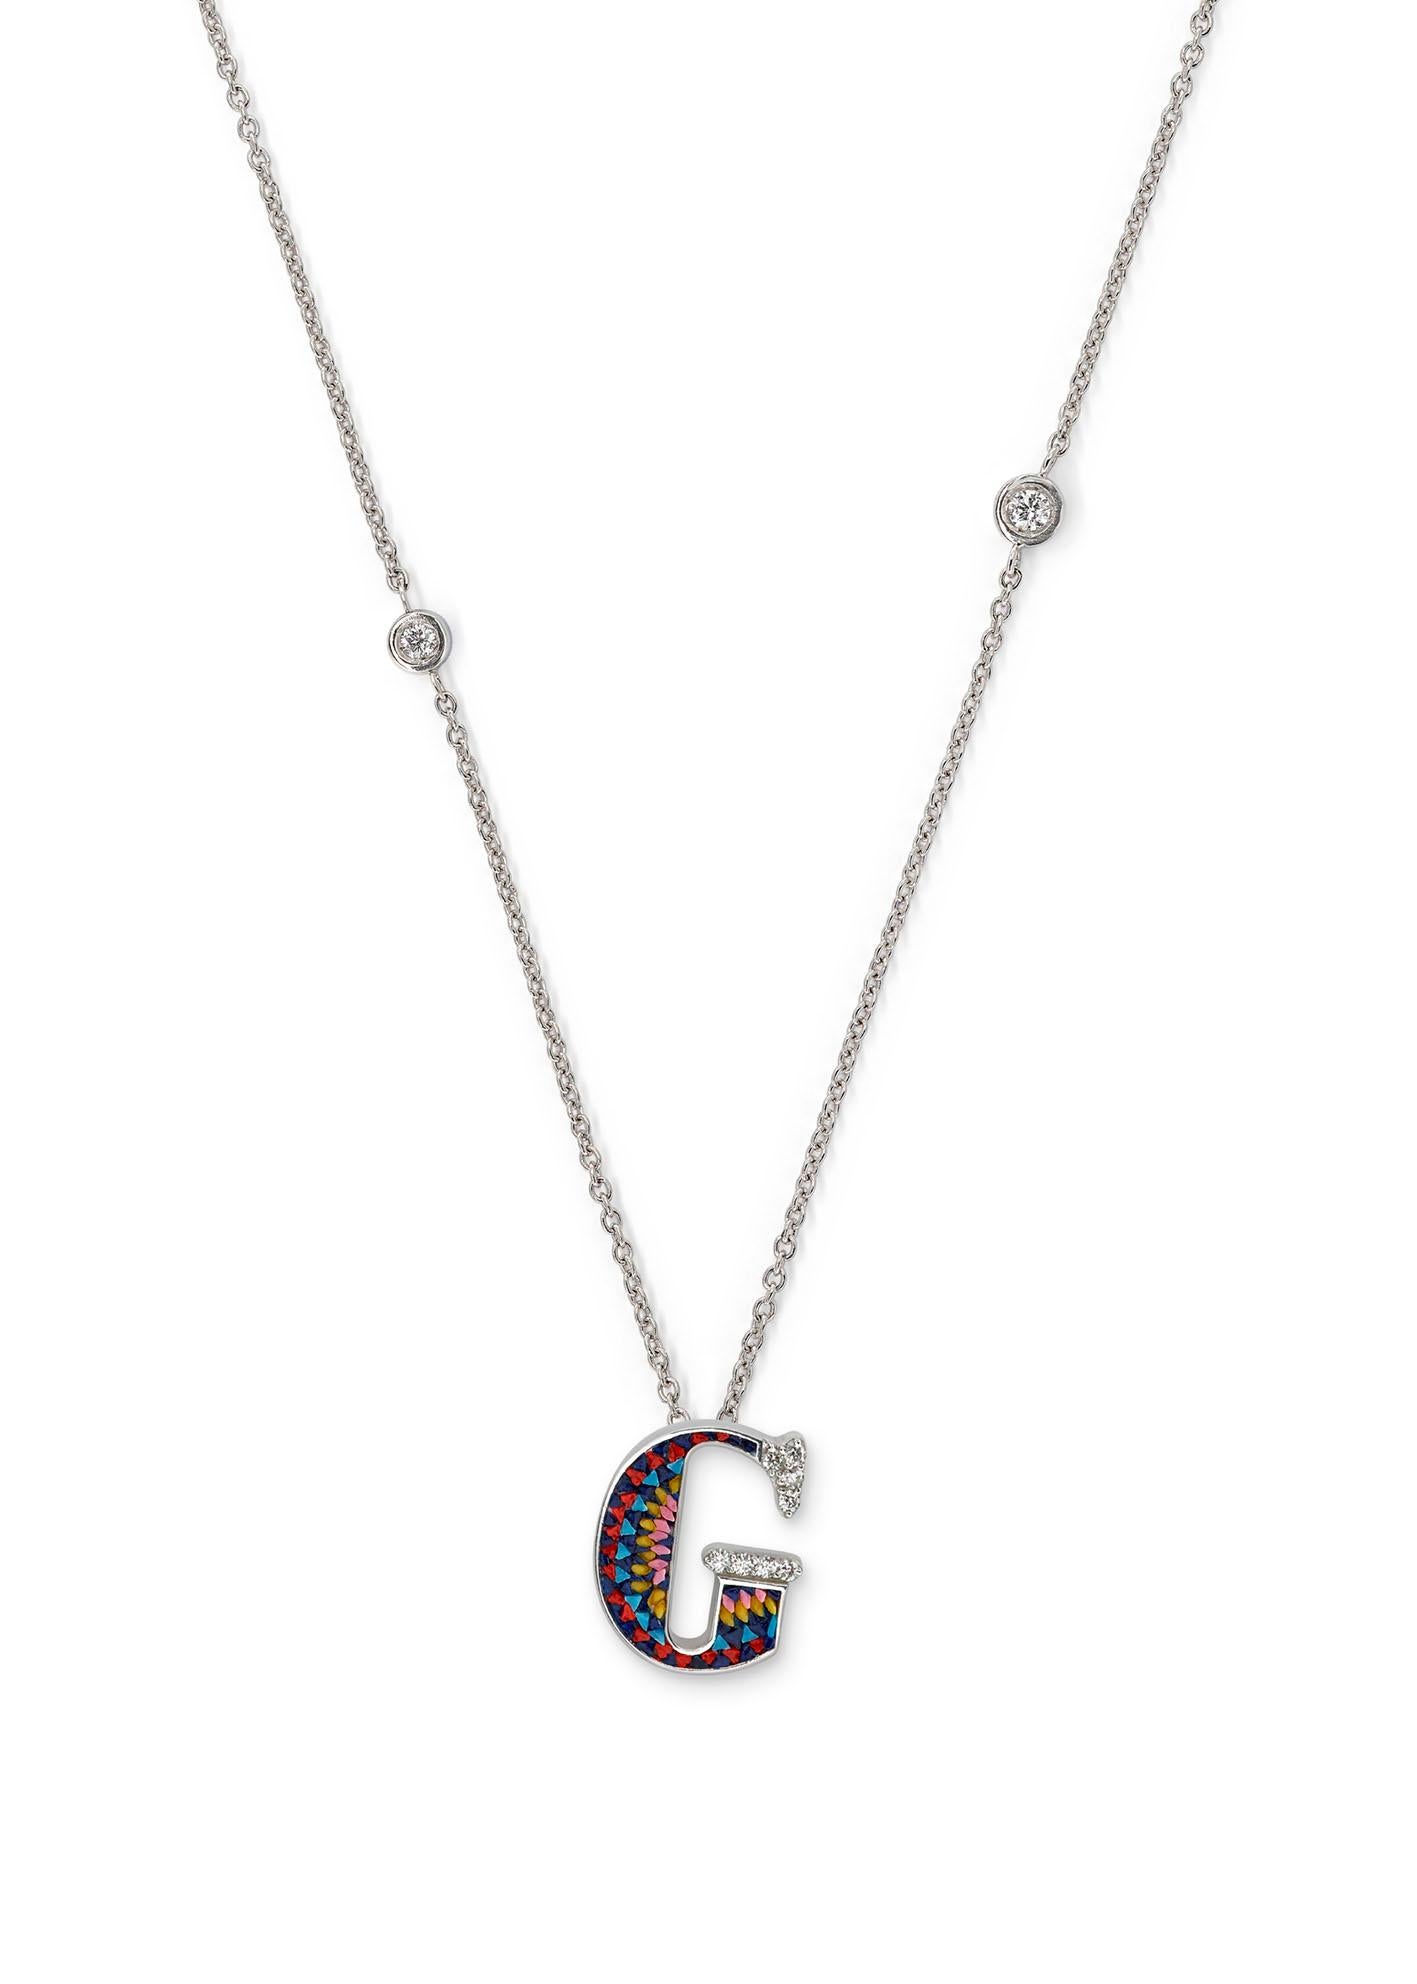 Brilliant Cut Necklace Letter G White Gold White Diamonds Hand Decorated with Micromosaic For Sale